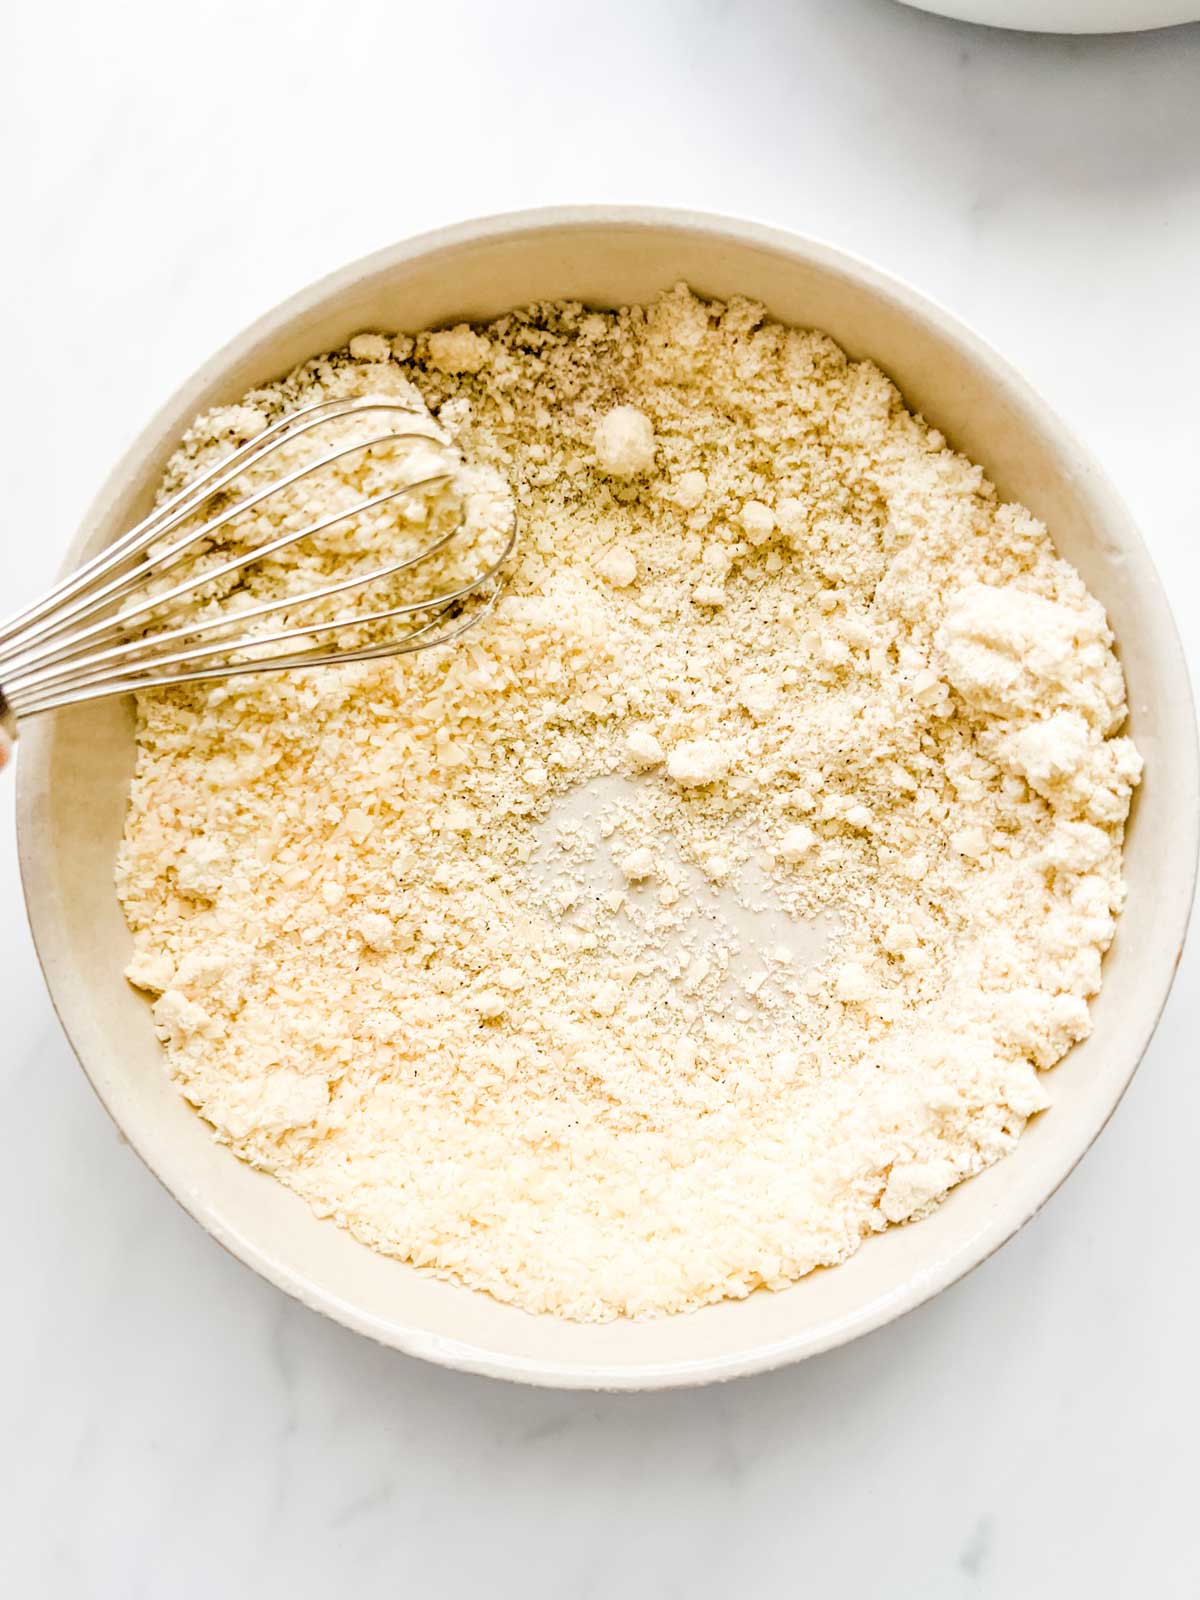 Photo of a seasoned almond flour parmesan mixture that has been whisked together in a shallow bowl.